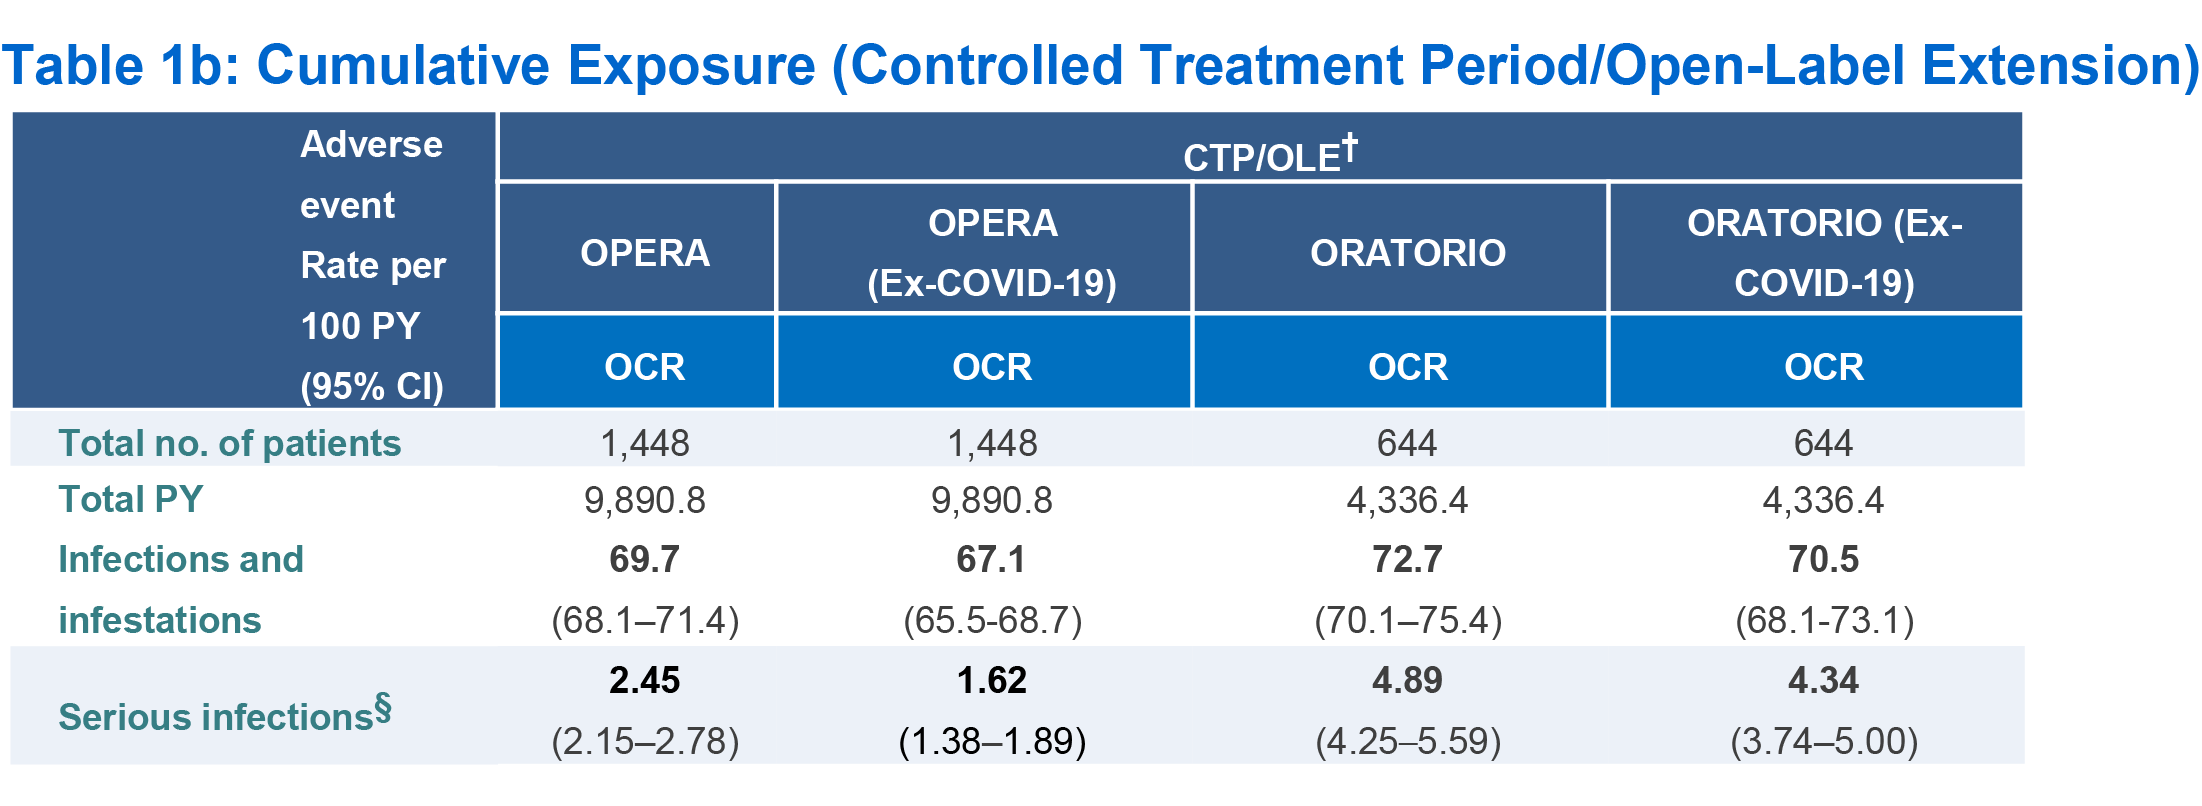 Table 1b: Cumulative Exposure (Controlled Treatment Period/Open-Label Extension)